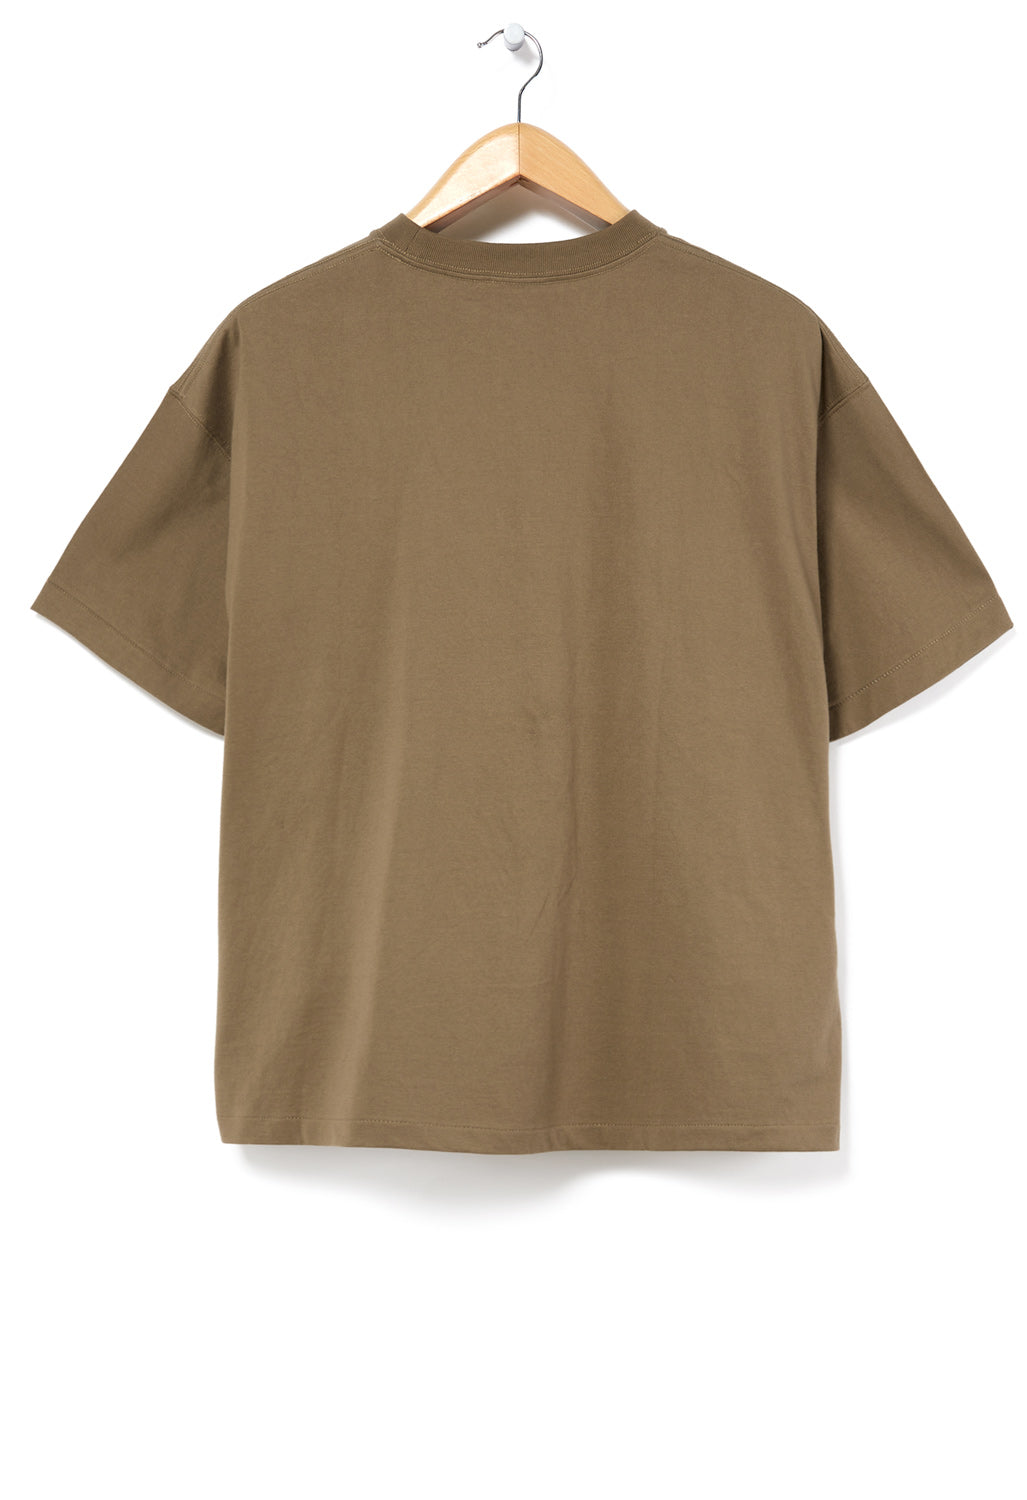 Wild Things Men's Double Pocket T-Shirt - Sand